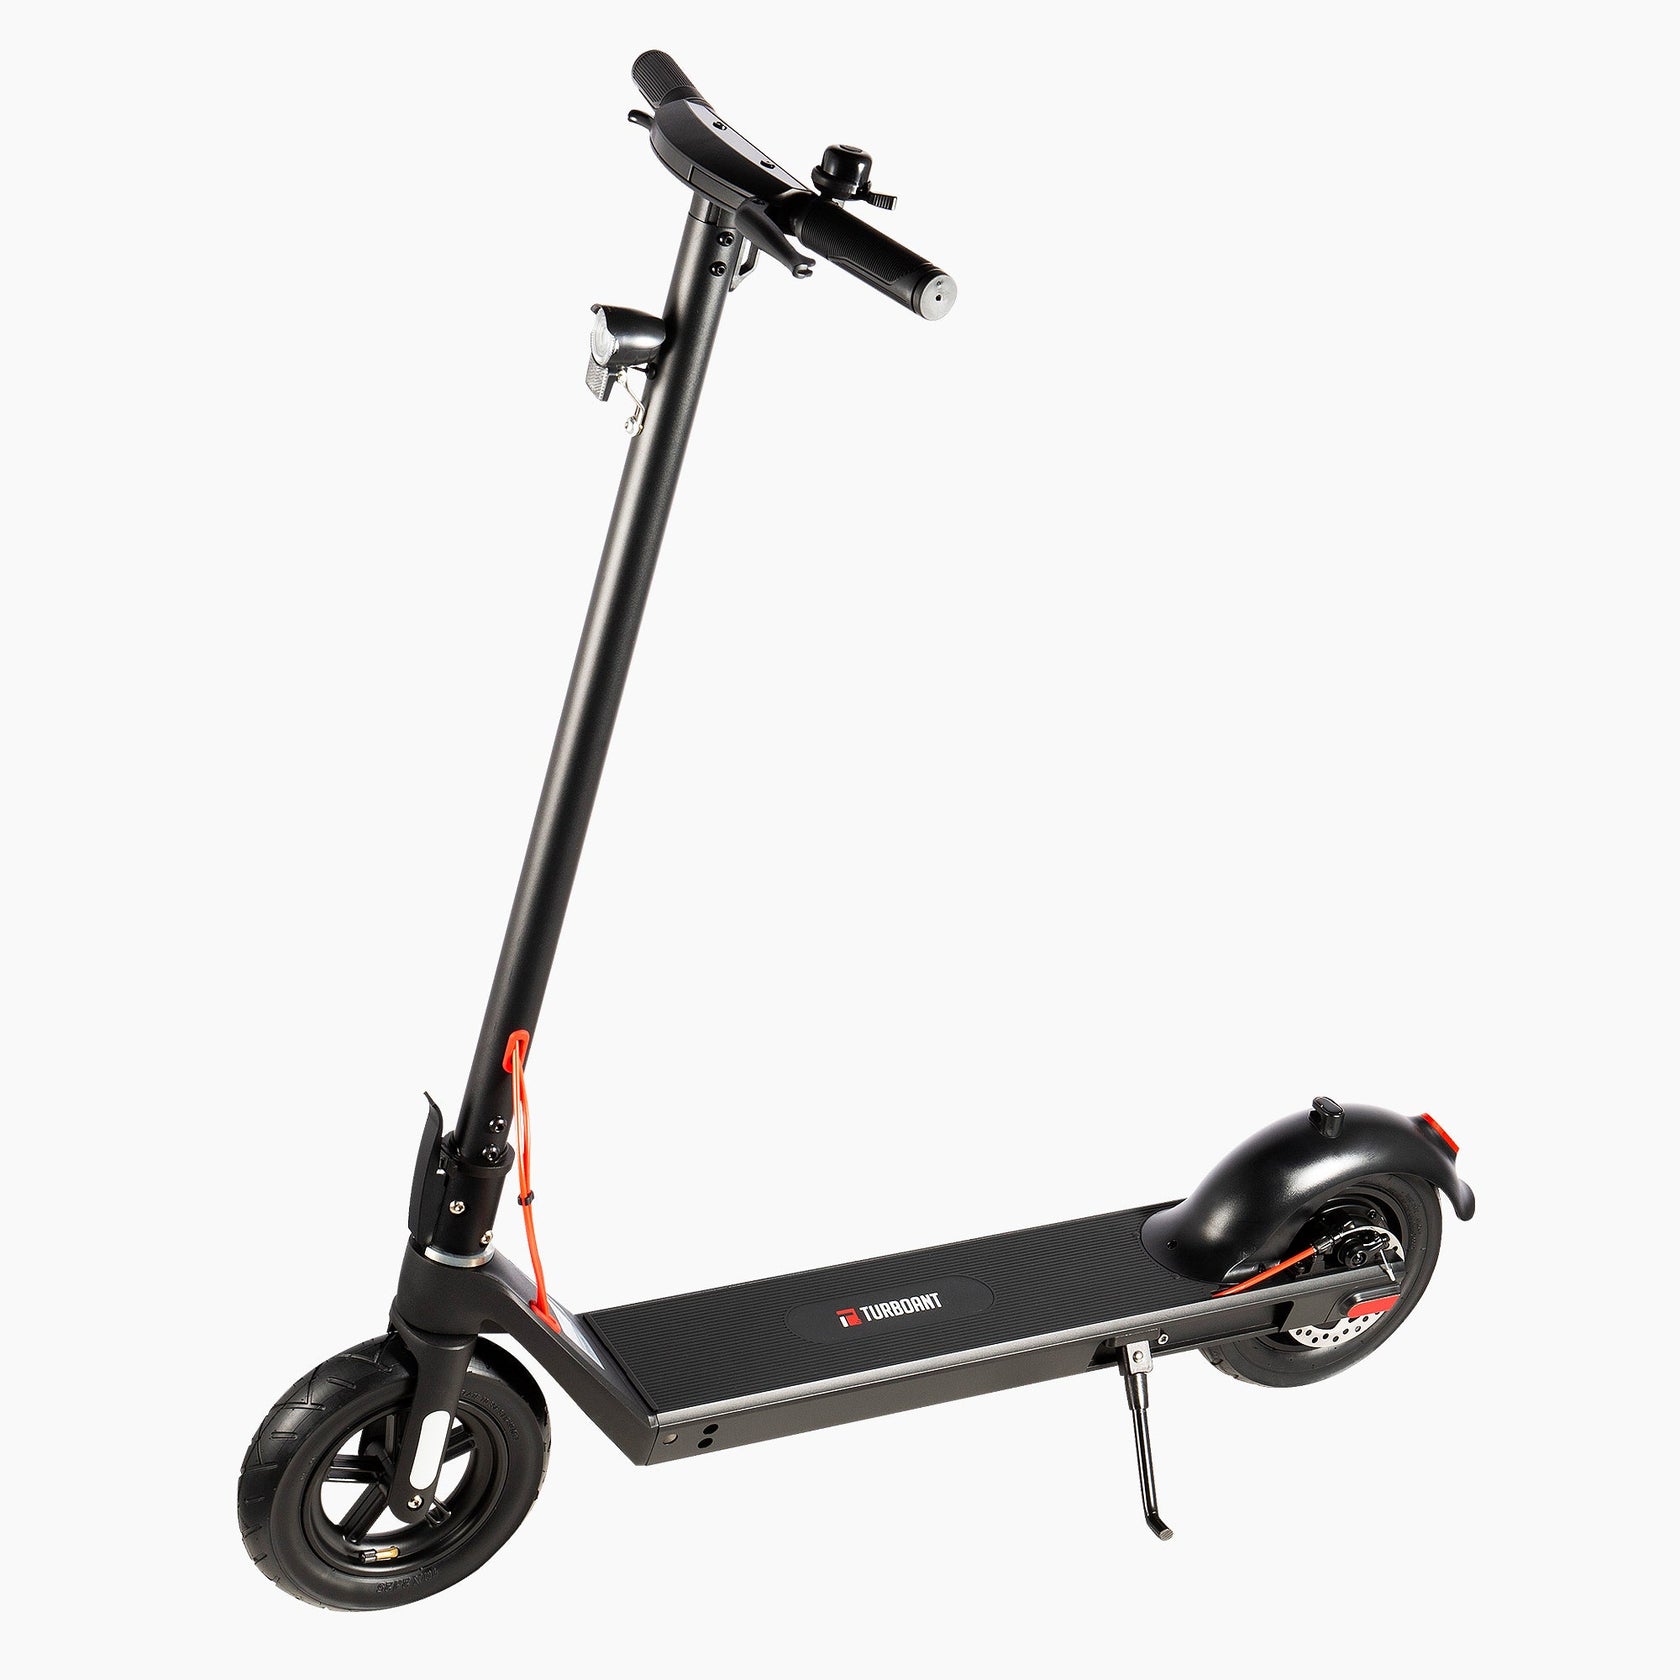 TurboAnt M10 adult electric scooter